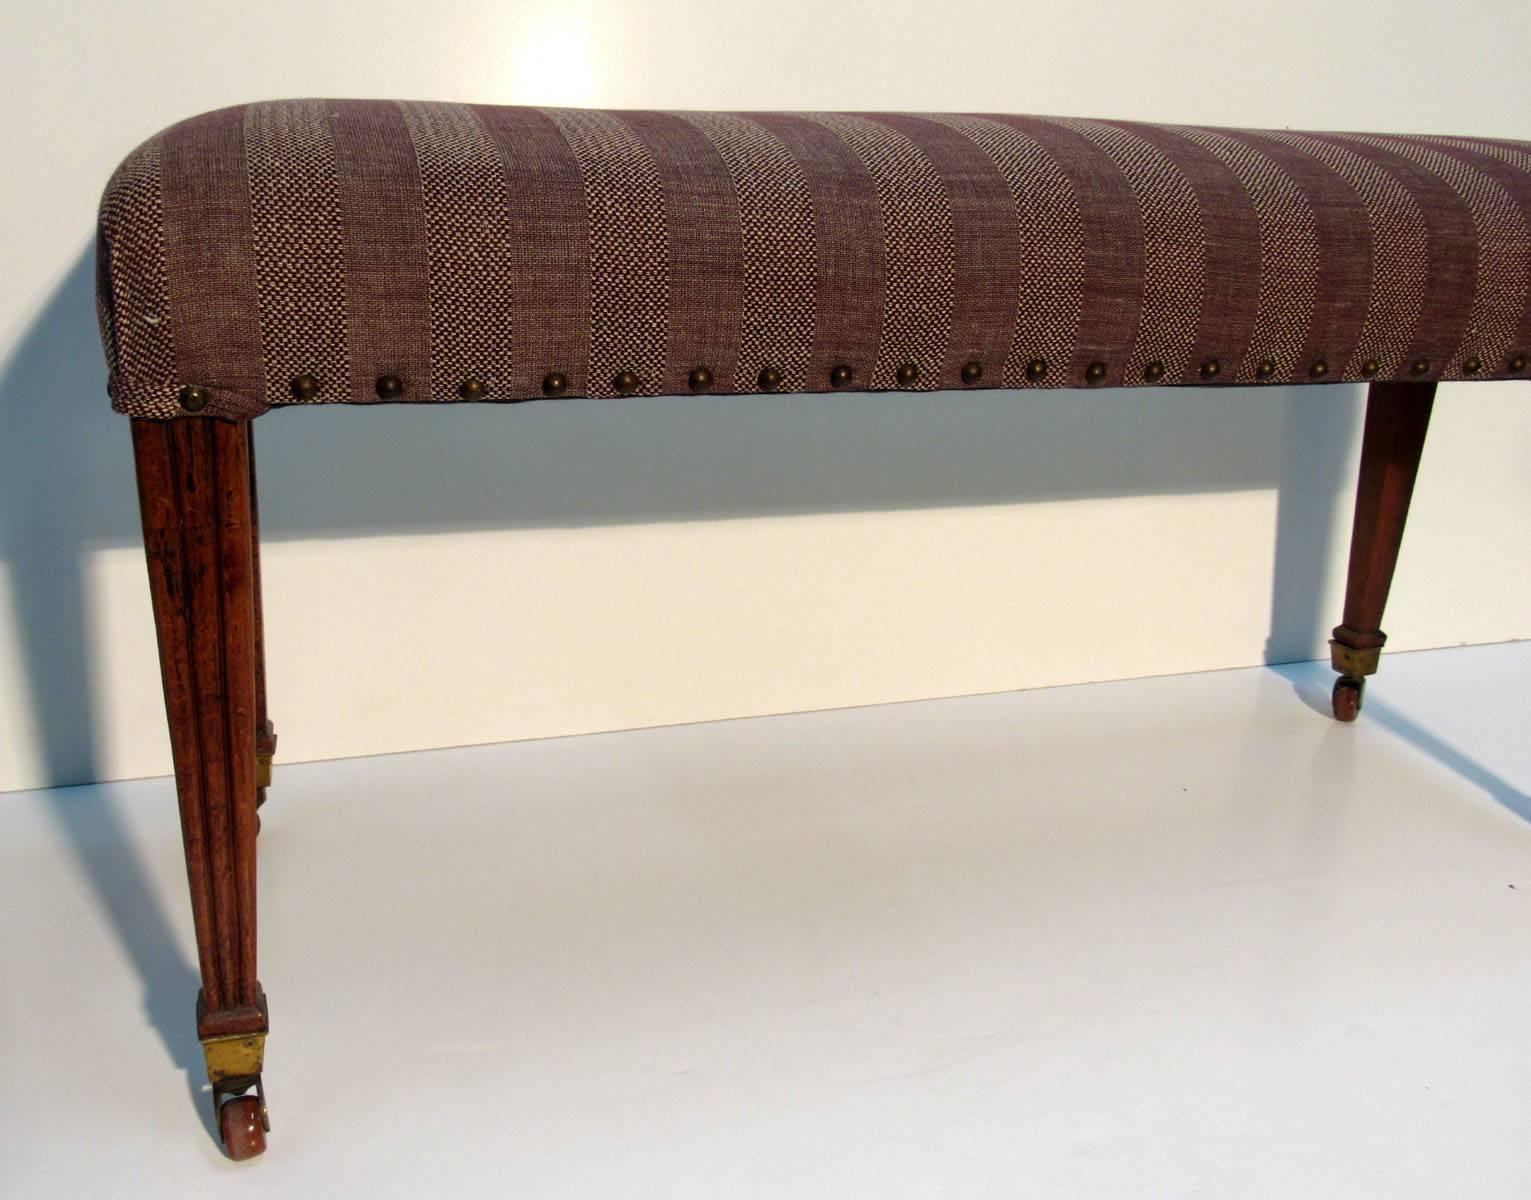 Late 18th-early 19th century Italian bench frame with a later purple stripe fabric, from a Peter Marino project.